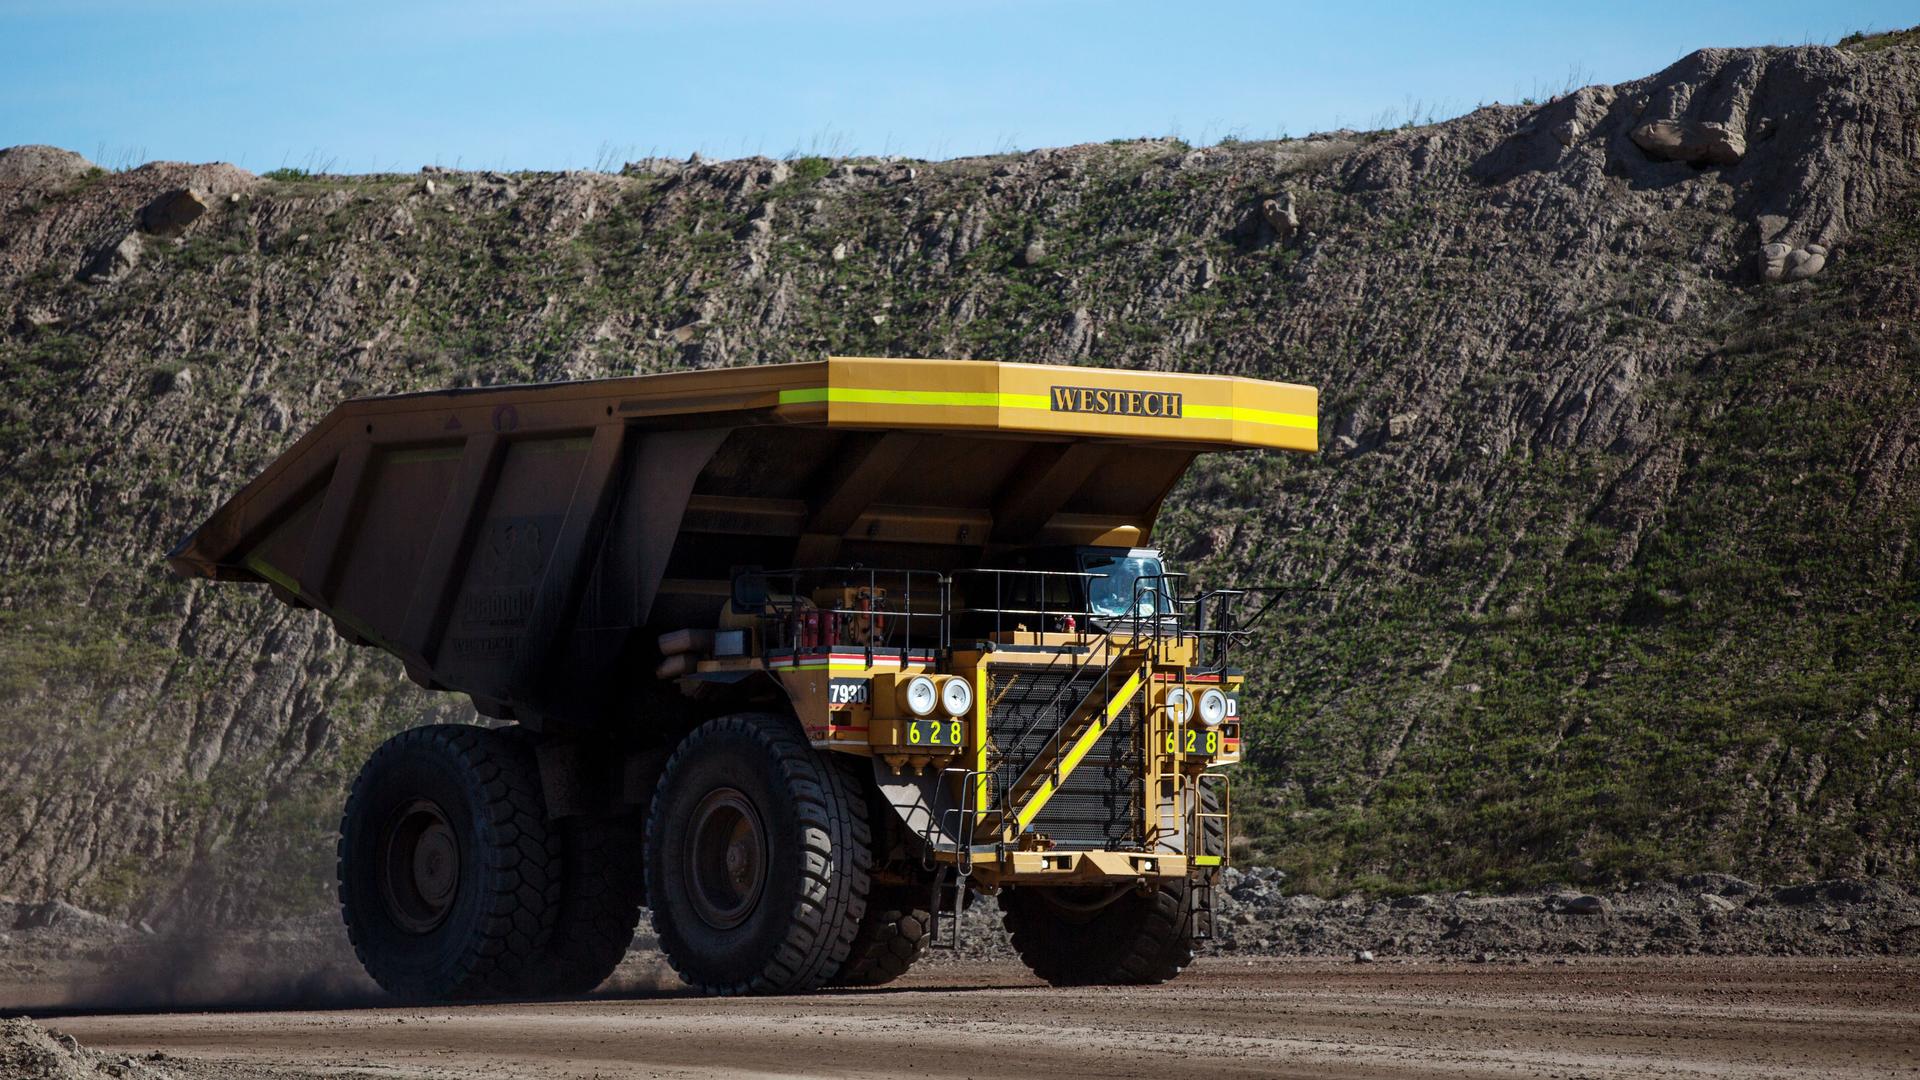 A haul truck at Peabody Energy's Rawhide coal mine near Gillette, Wyoming. The past few years have been tough for the coal industry in Wyoming — the company filed for Chapter 11 bankruptcy in 2016.